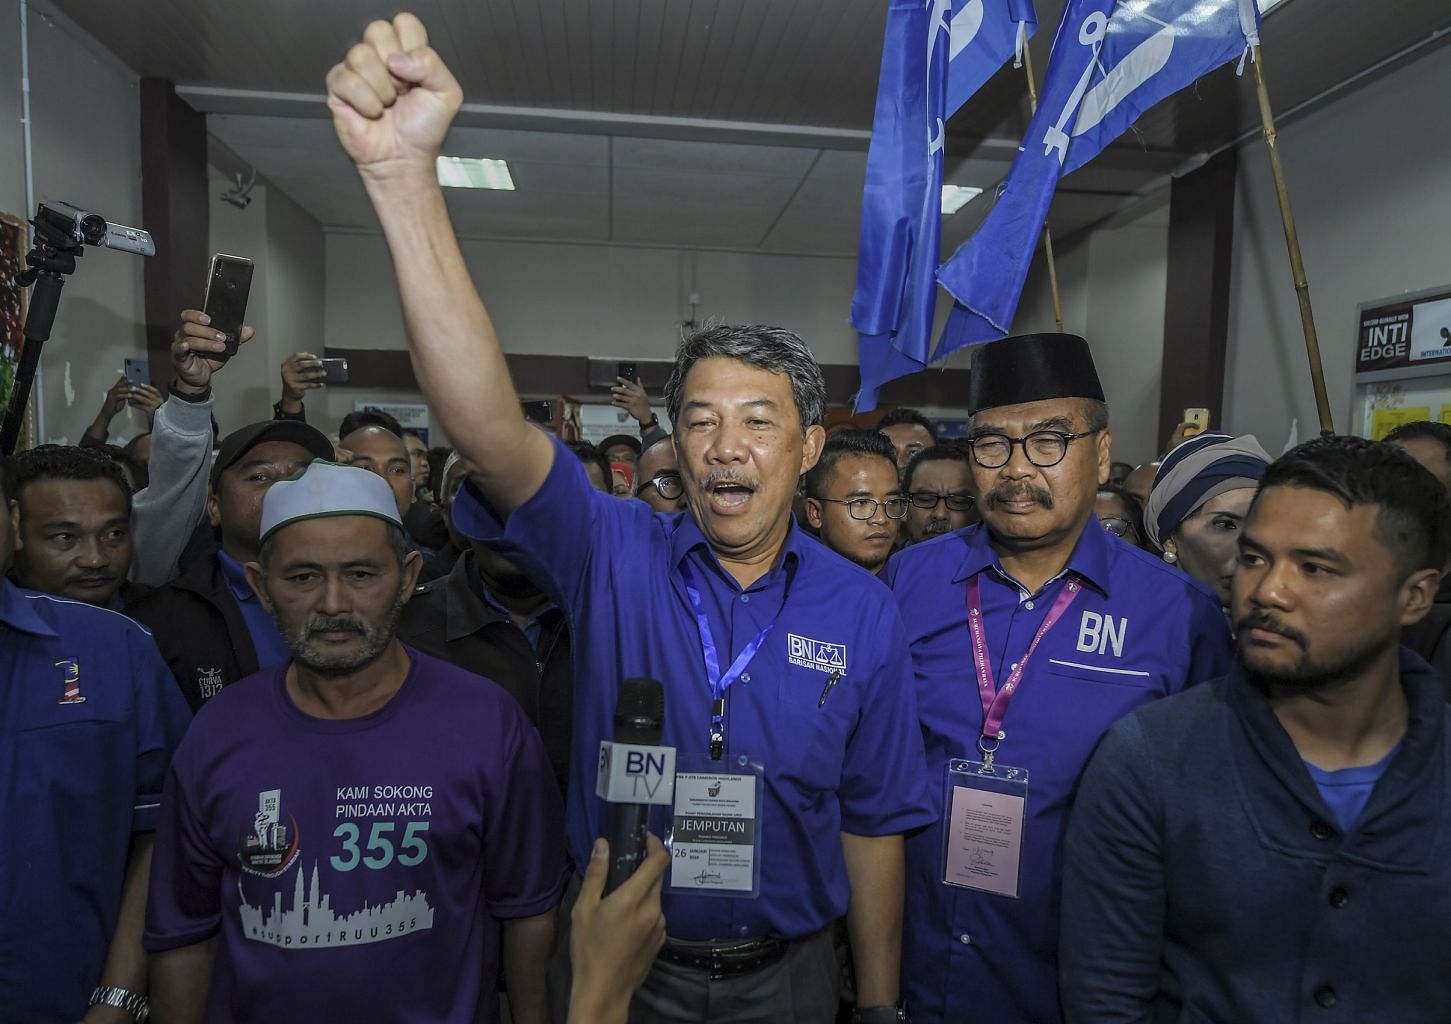 Bn Crushes Ph In Closely Watched Cameron Highlands By Election Se Asia News Top Stories The Straits Times